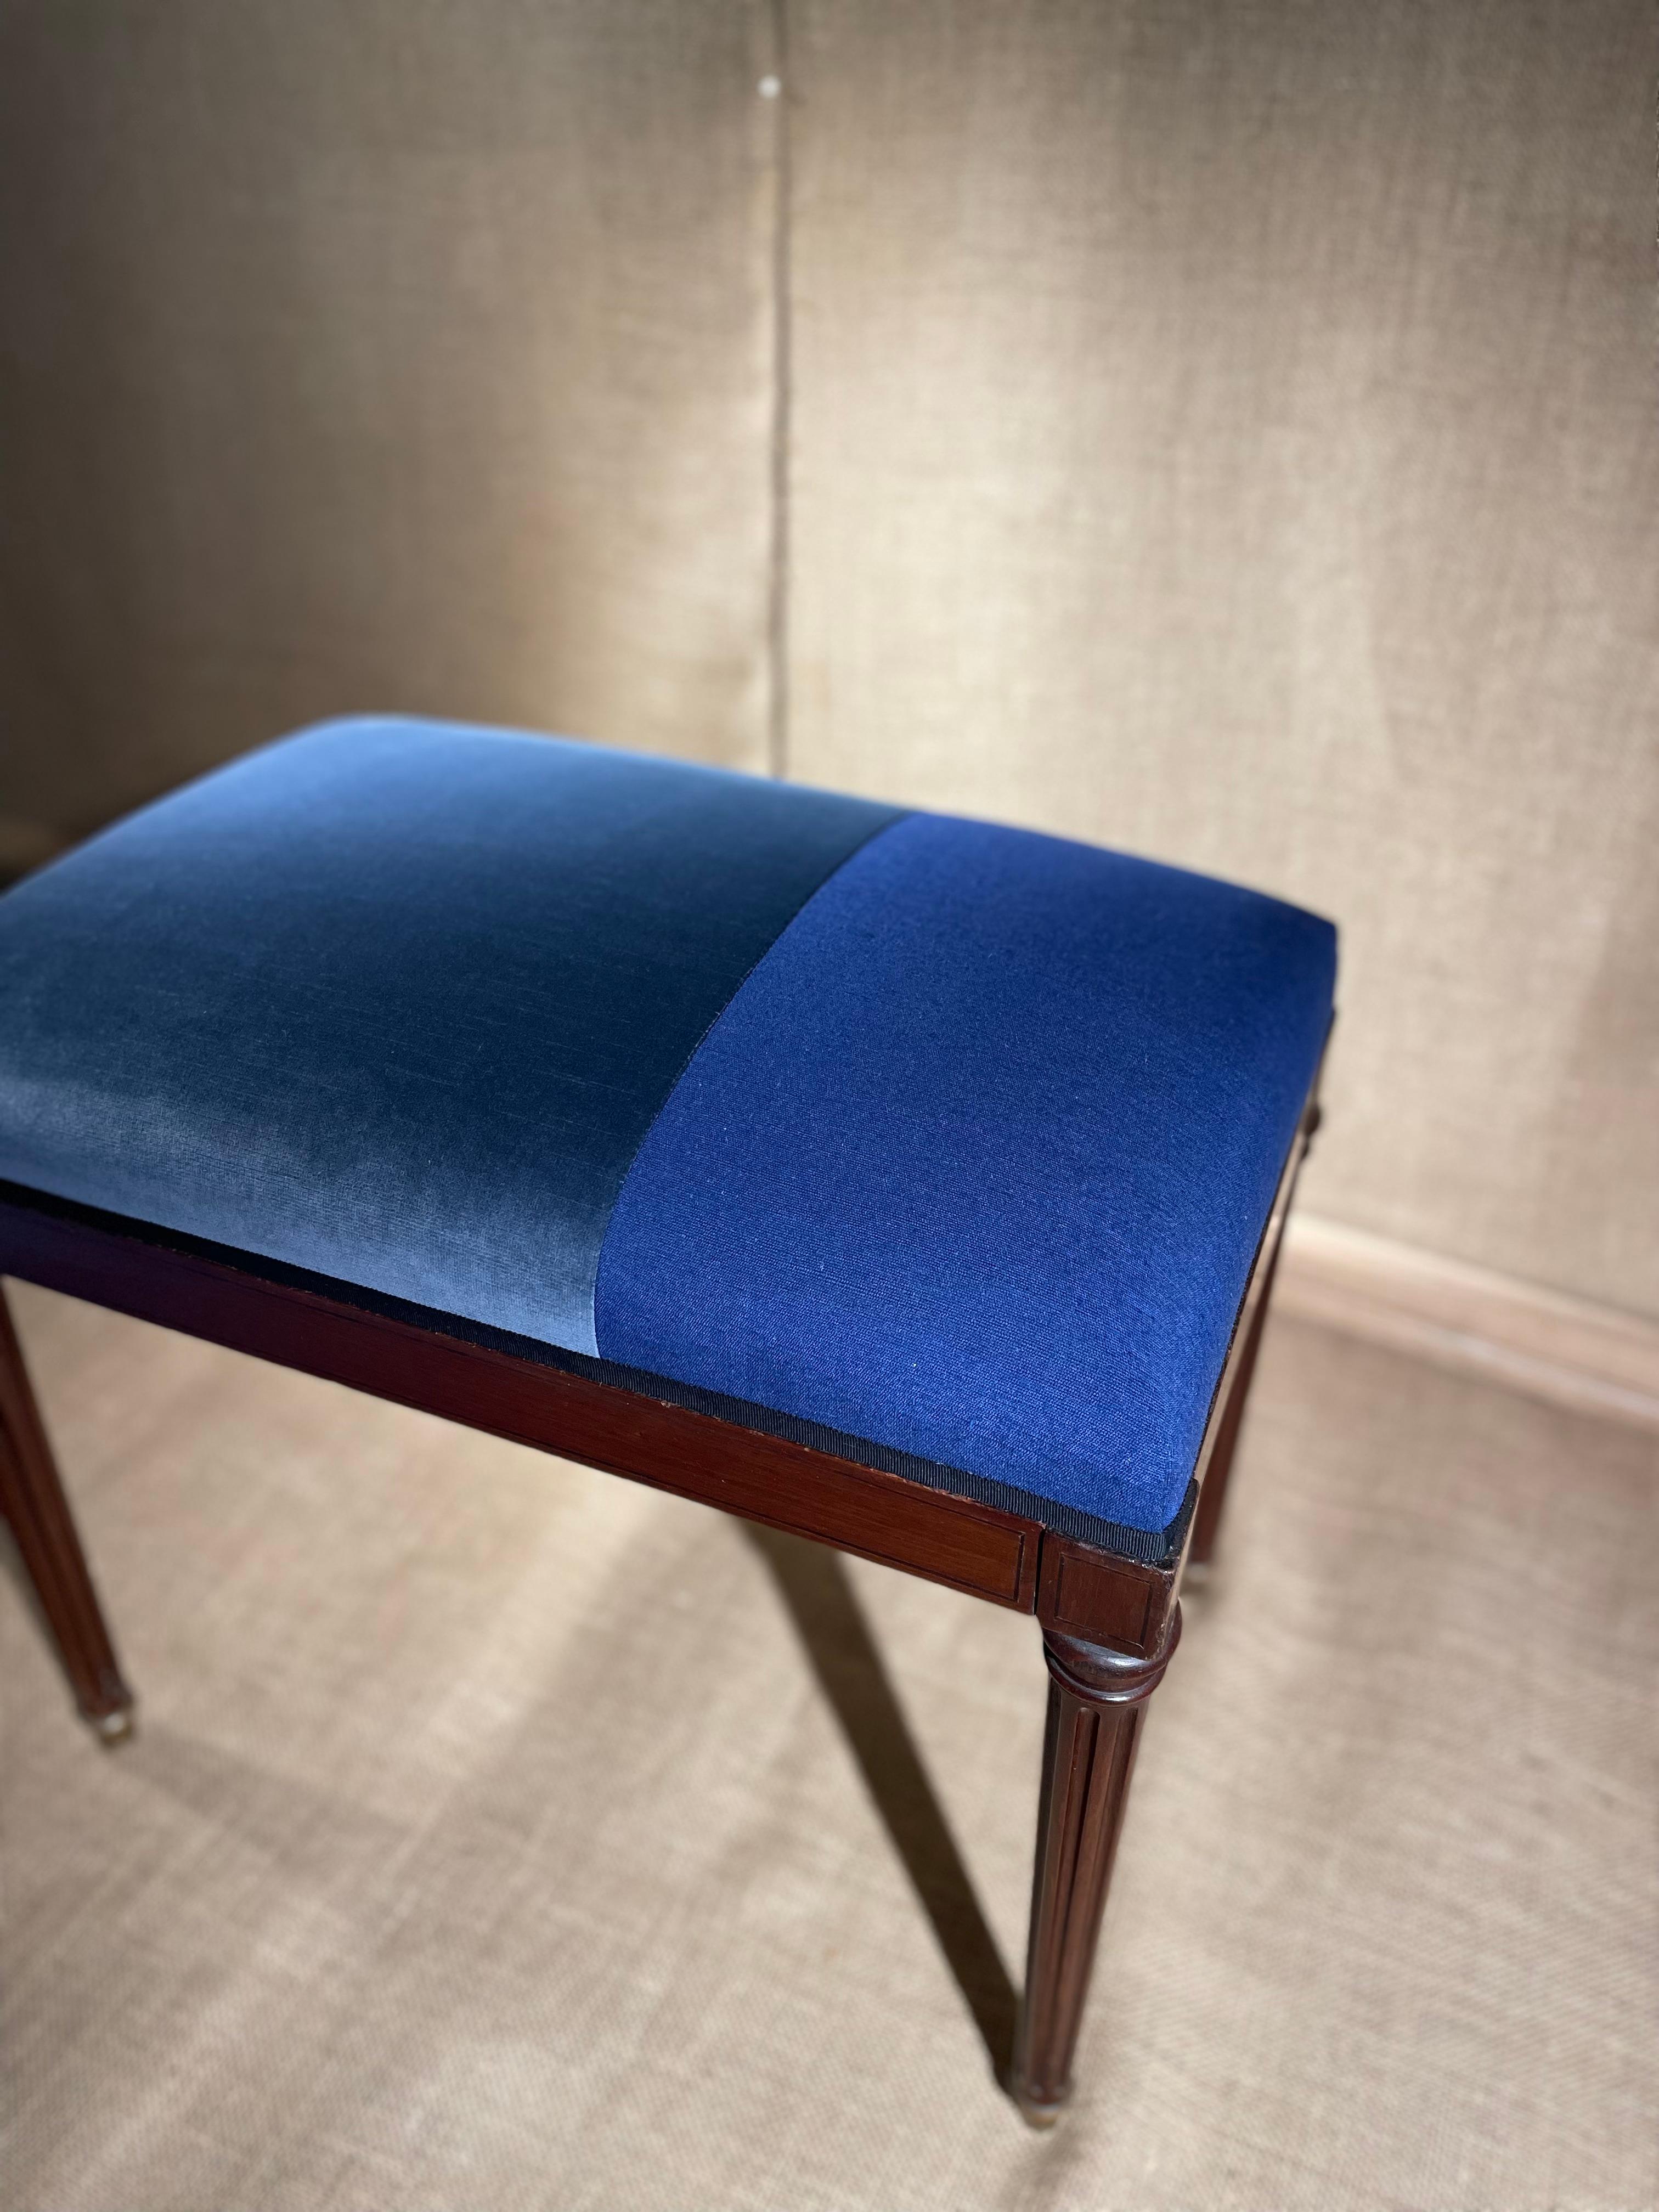 A  Neoclassical Bench created by “Edward Garratt XVII and XIX Century Reproductions,” upholstered in blue velvet and linen fabrics. Circa 20th Century.